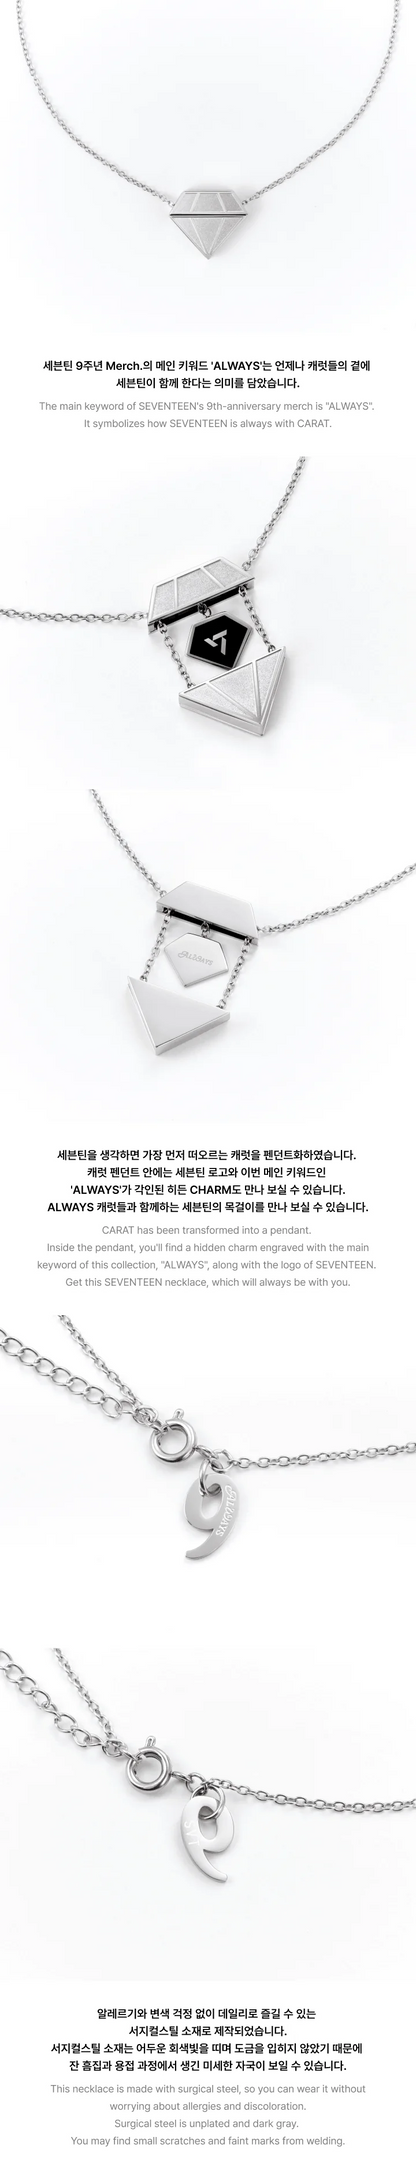 SEVENTEEN - 9TH ANNIVERSARY (Official MD) / NECKLACE: SEVENTEEN 